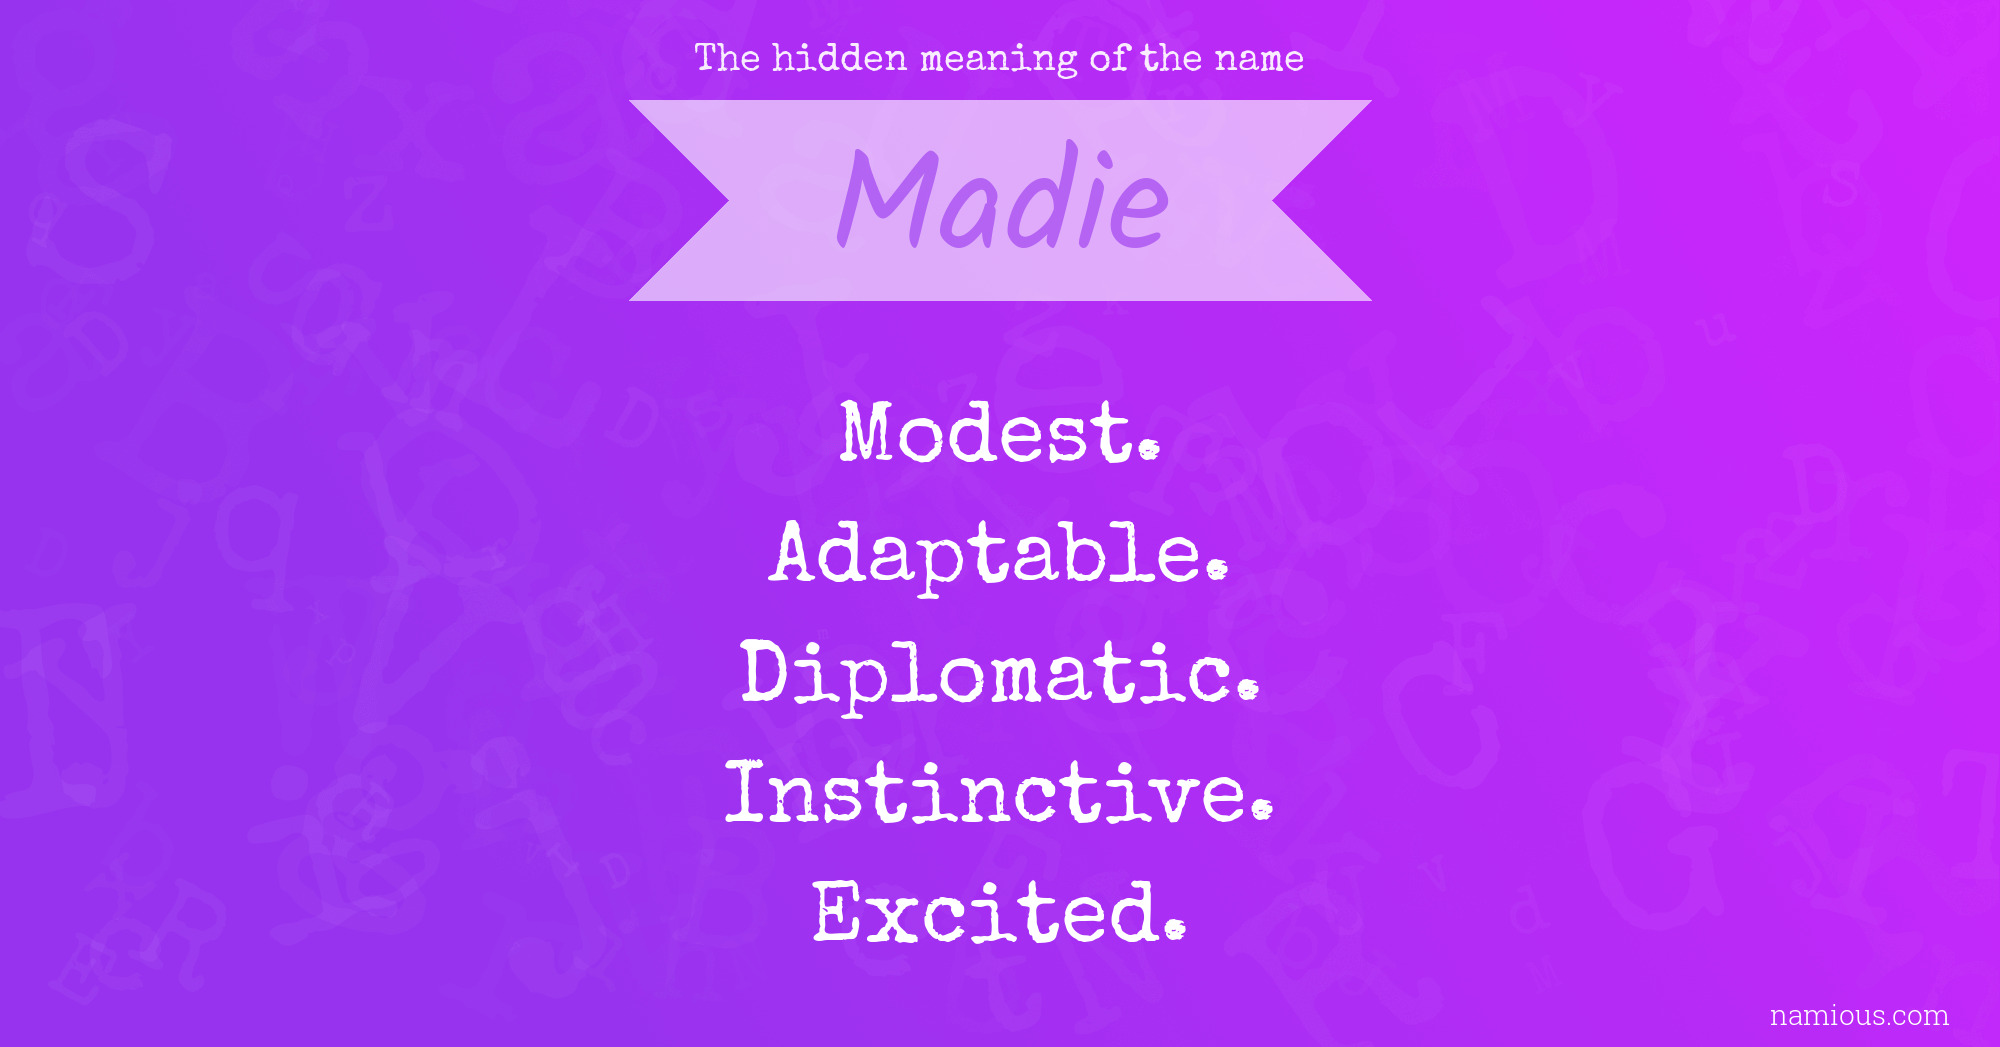 The hidden meaning of the name Madie